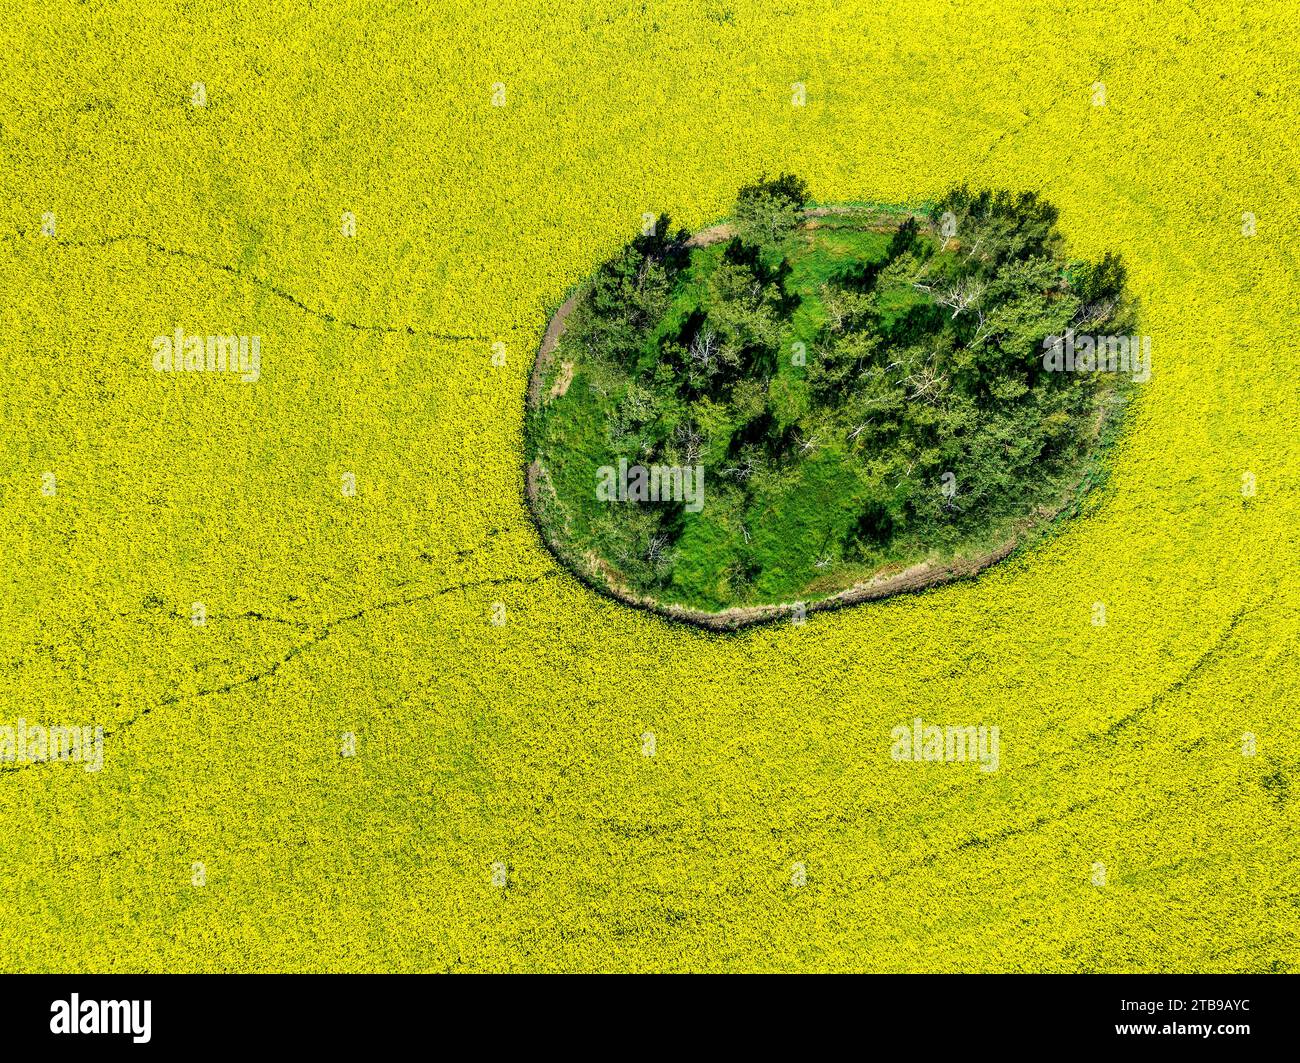 Aerial view, looking straight down at a grouping of green trees in a ripe golden canola field, west of Calgary, Alberta; Alberta, Canada Stock Photo